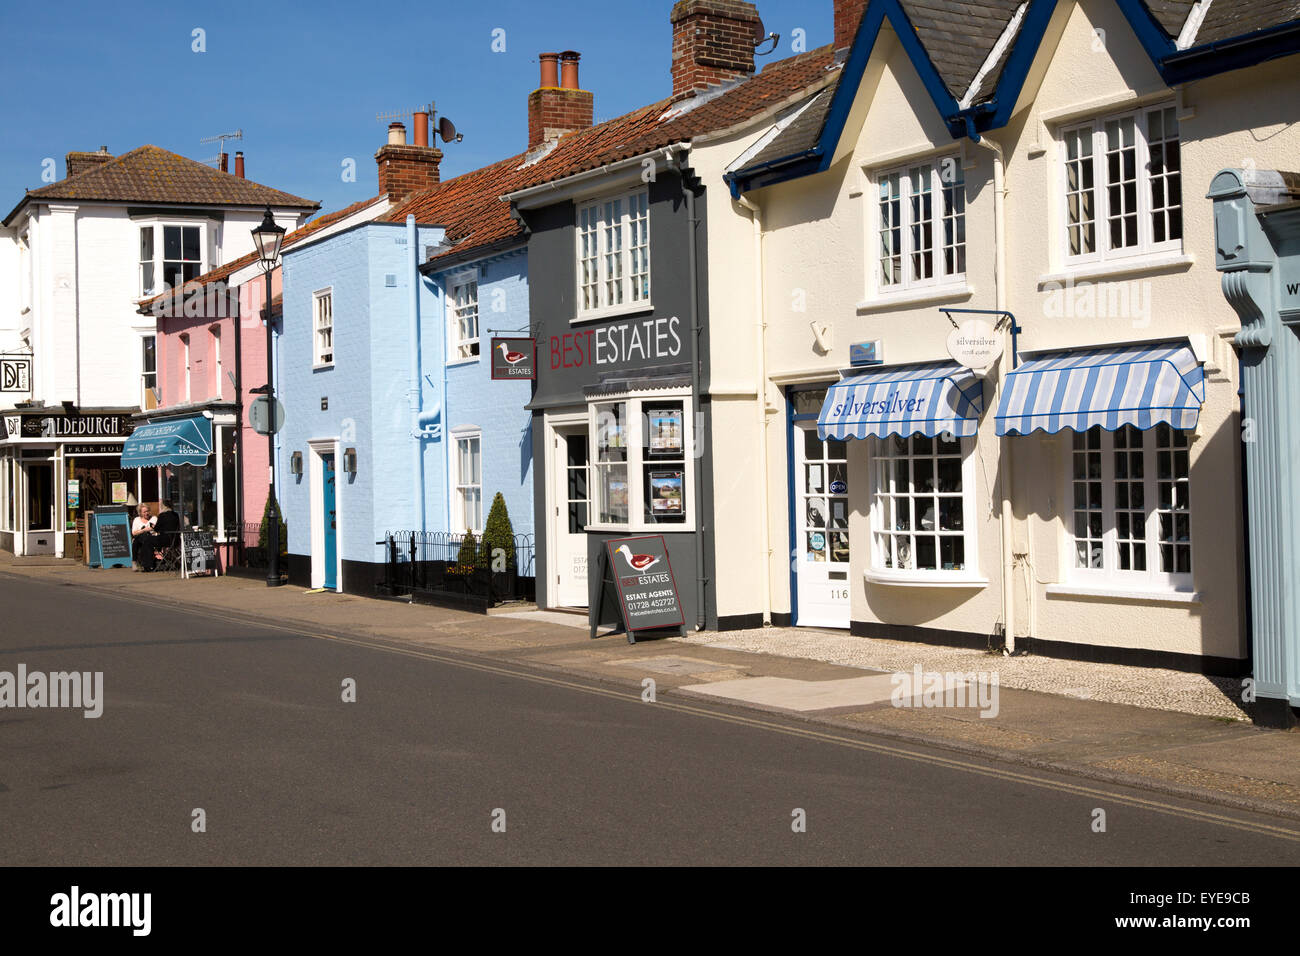 Attractive historic buildings and shops, Aldeburgh, Suffolk, England, UK Stock Photo